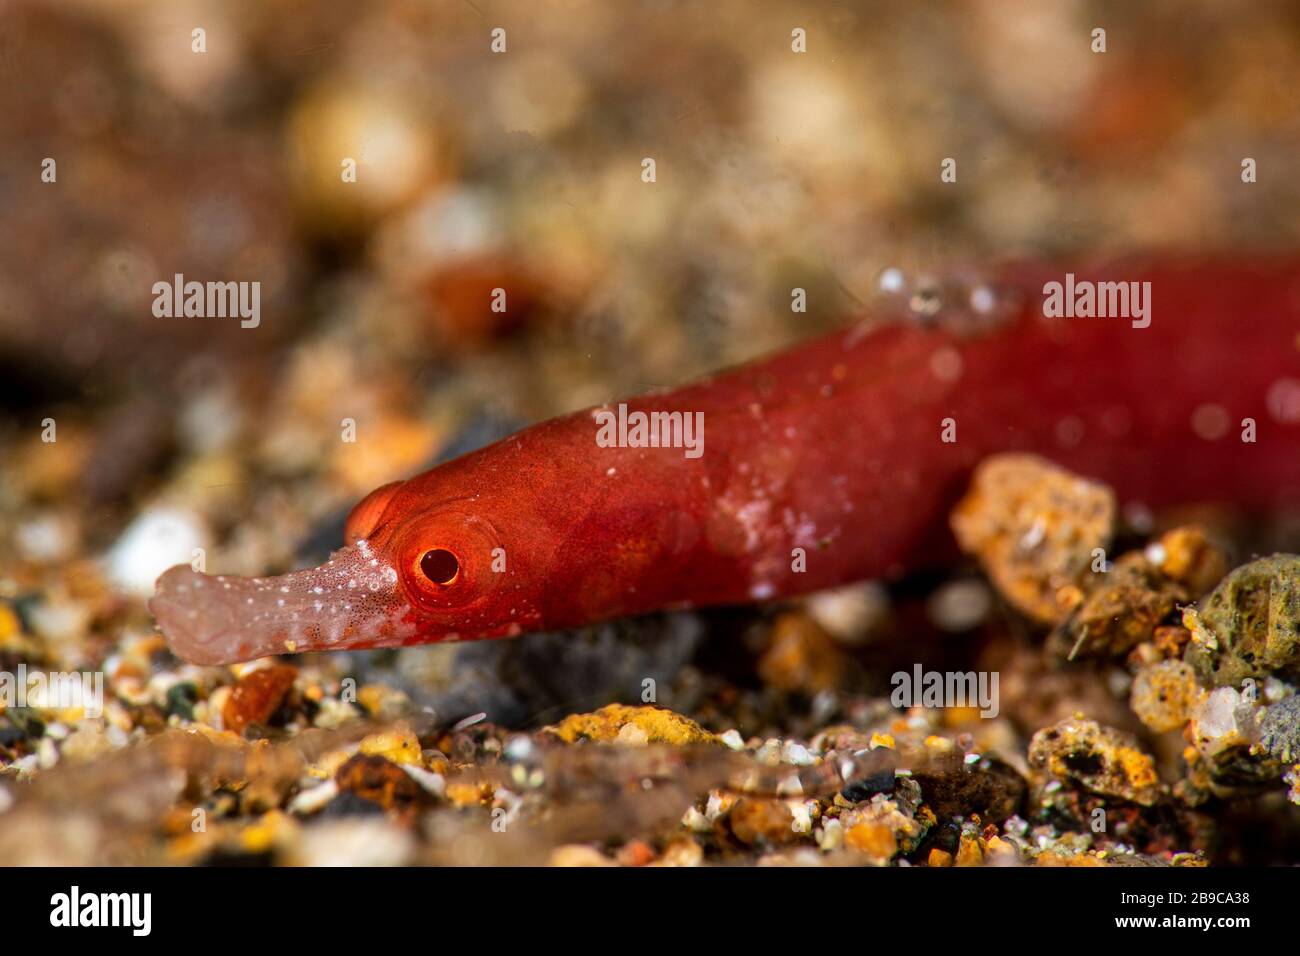 A pygmy pipefish with a white snout searches for a meal on the sea floor. Stock Photo